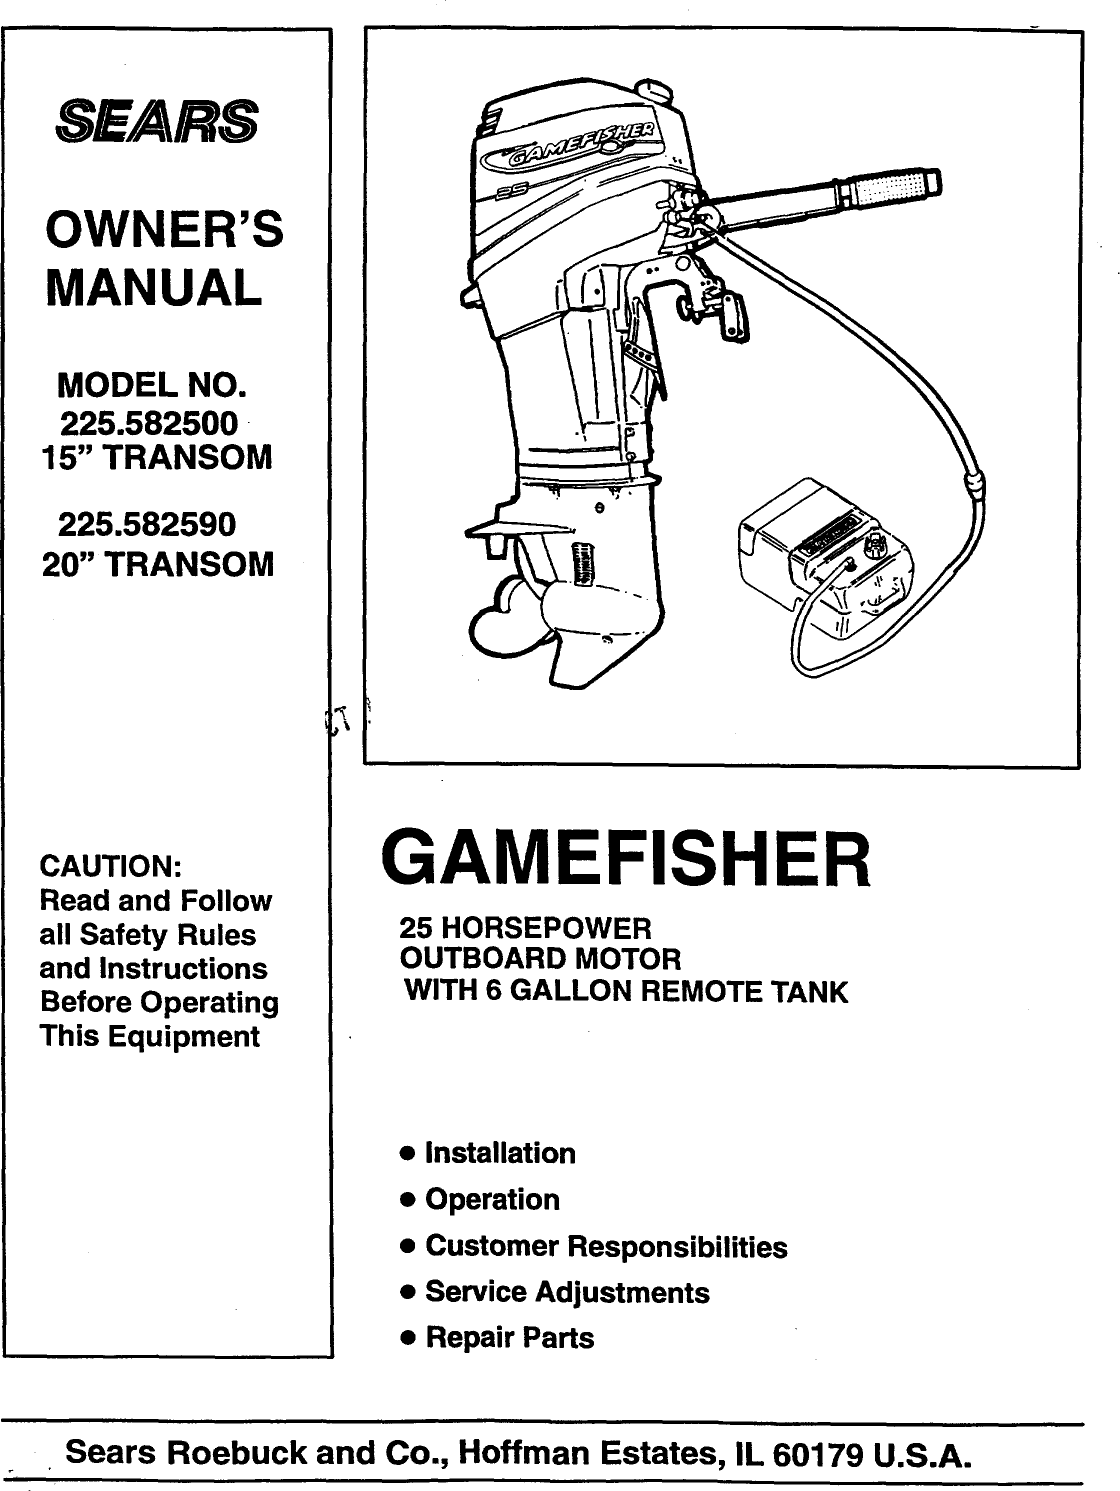 Gamefisher 9.9 outboard motor manual